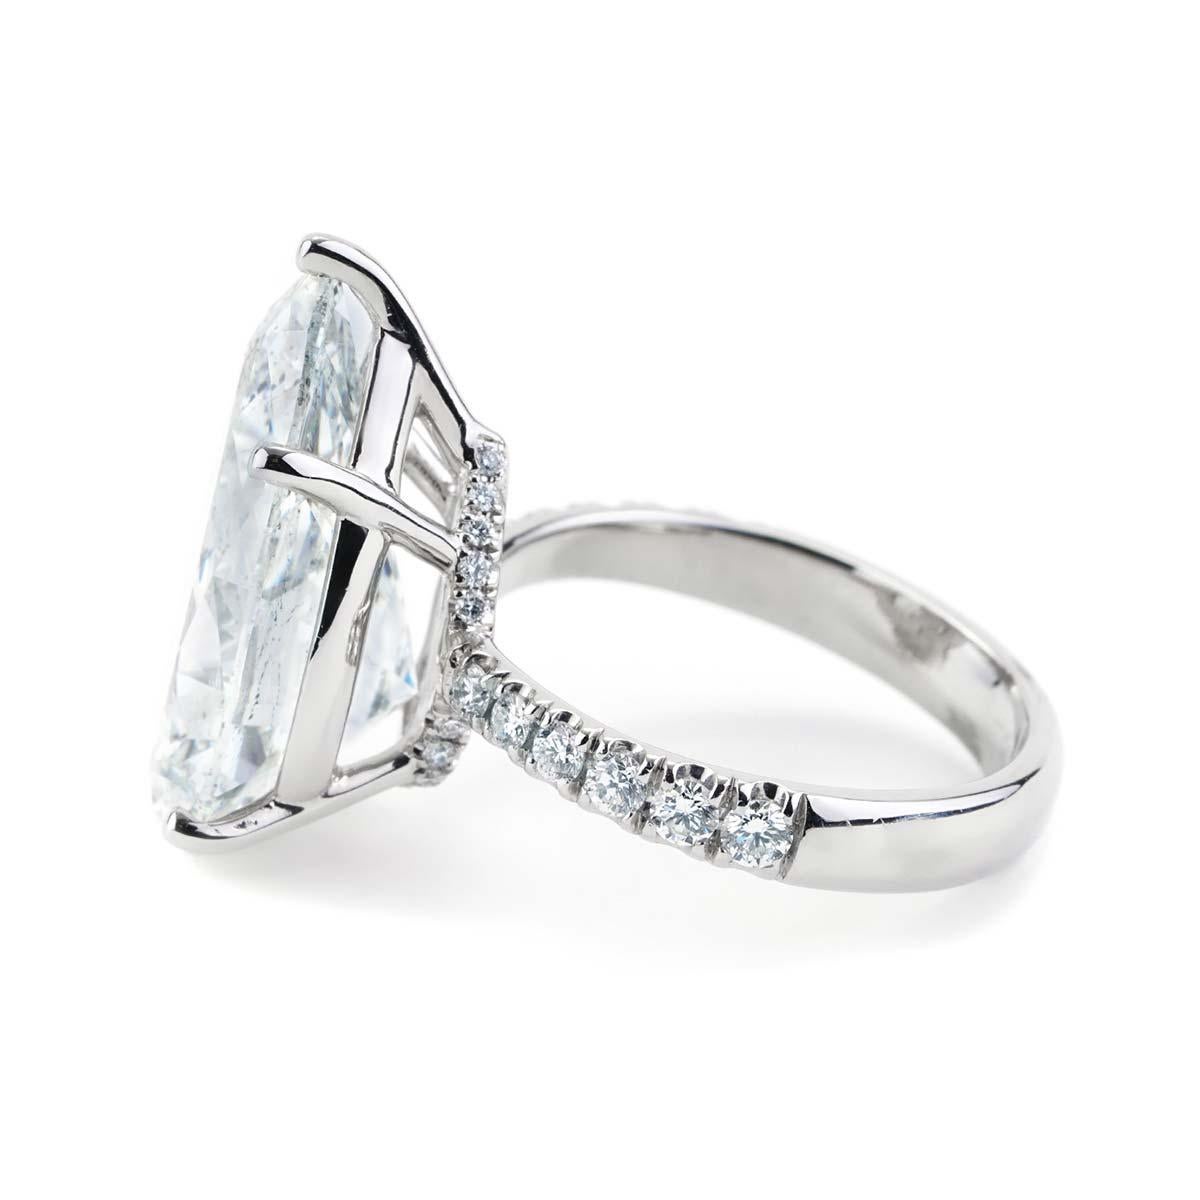 Contemporary 10.35 Carat GIA Certified Natural Pear Diamond Engagement Ring in Platinum For Sale